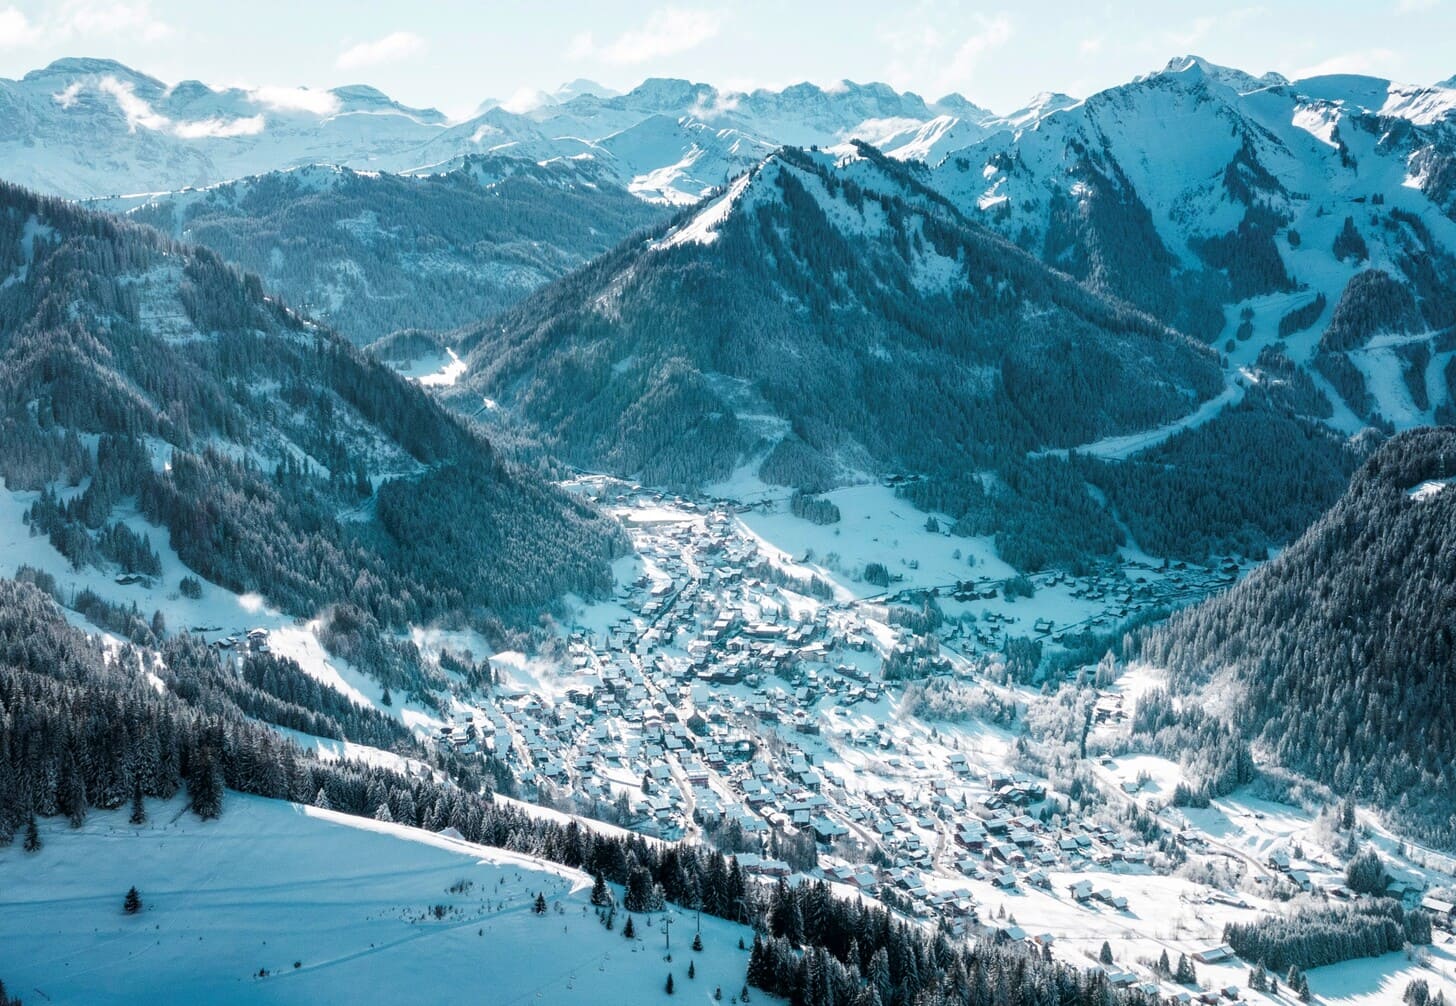 Chatel village is the place for family ski holiday